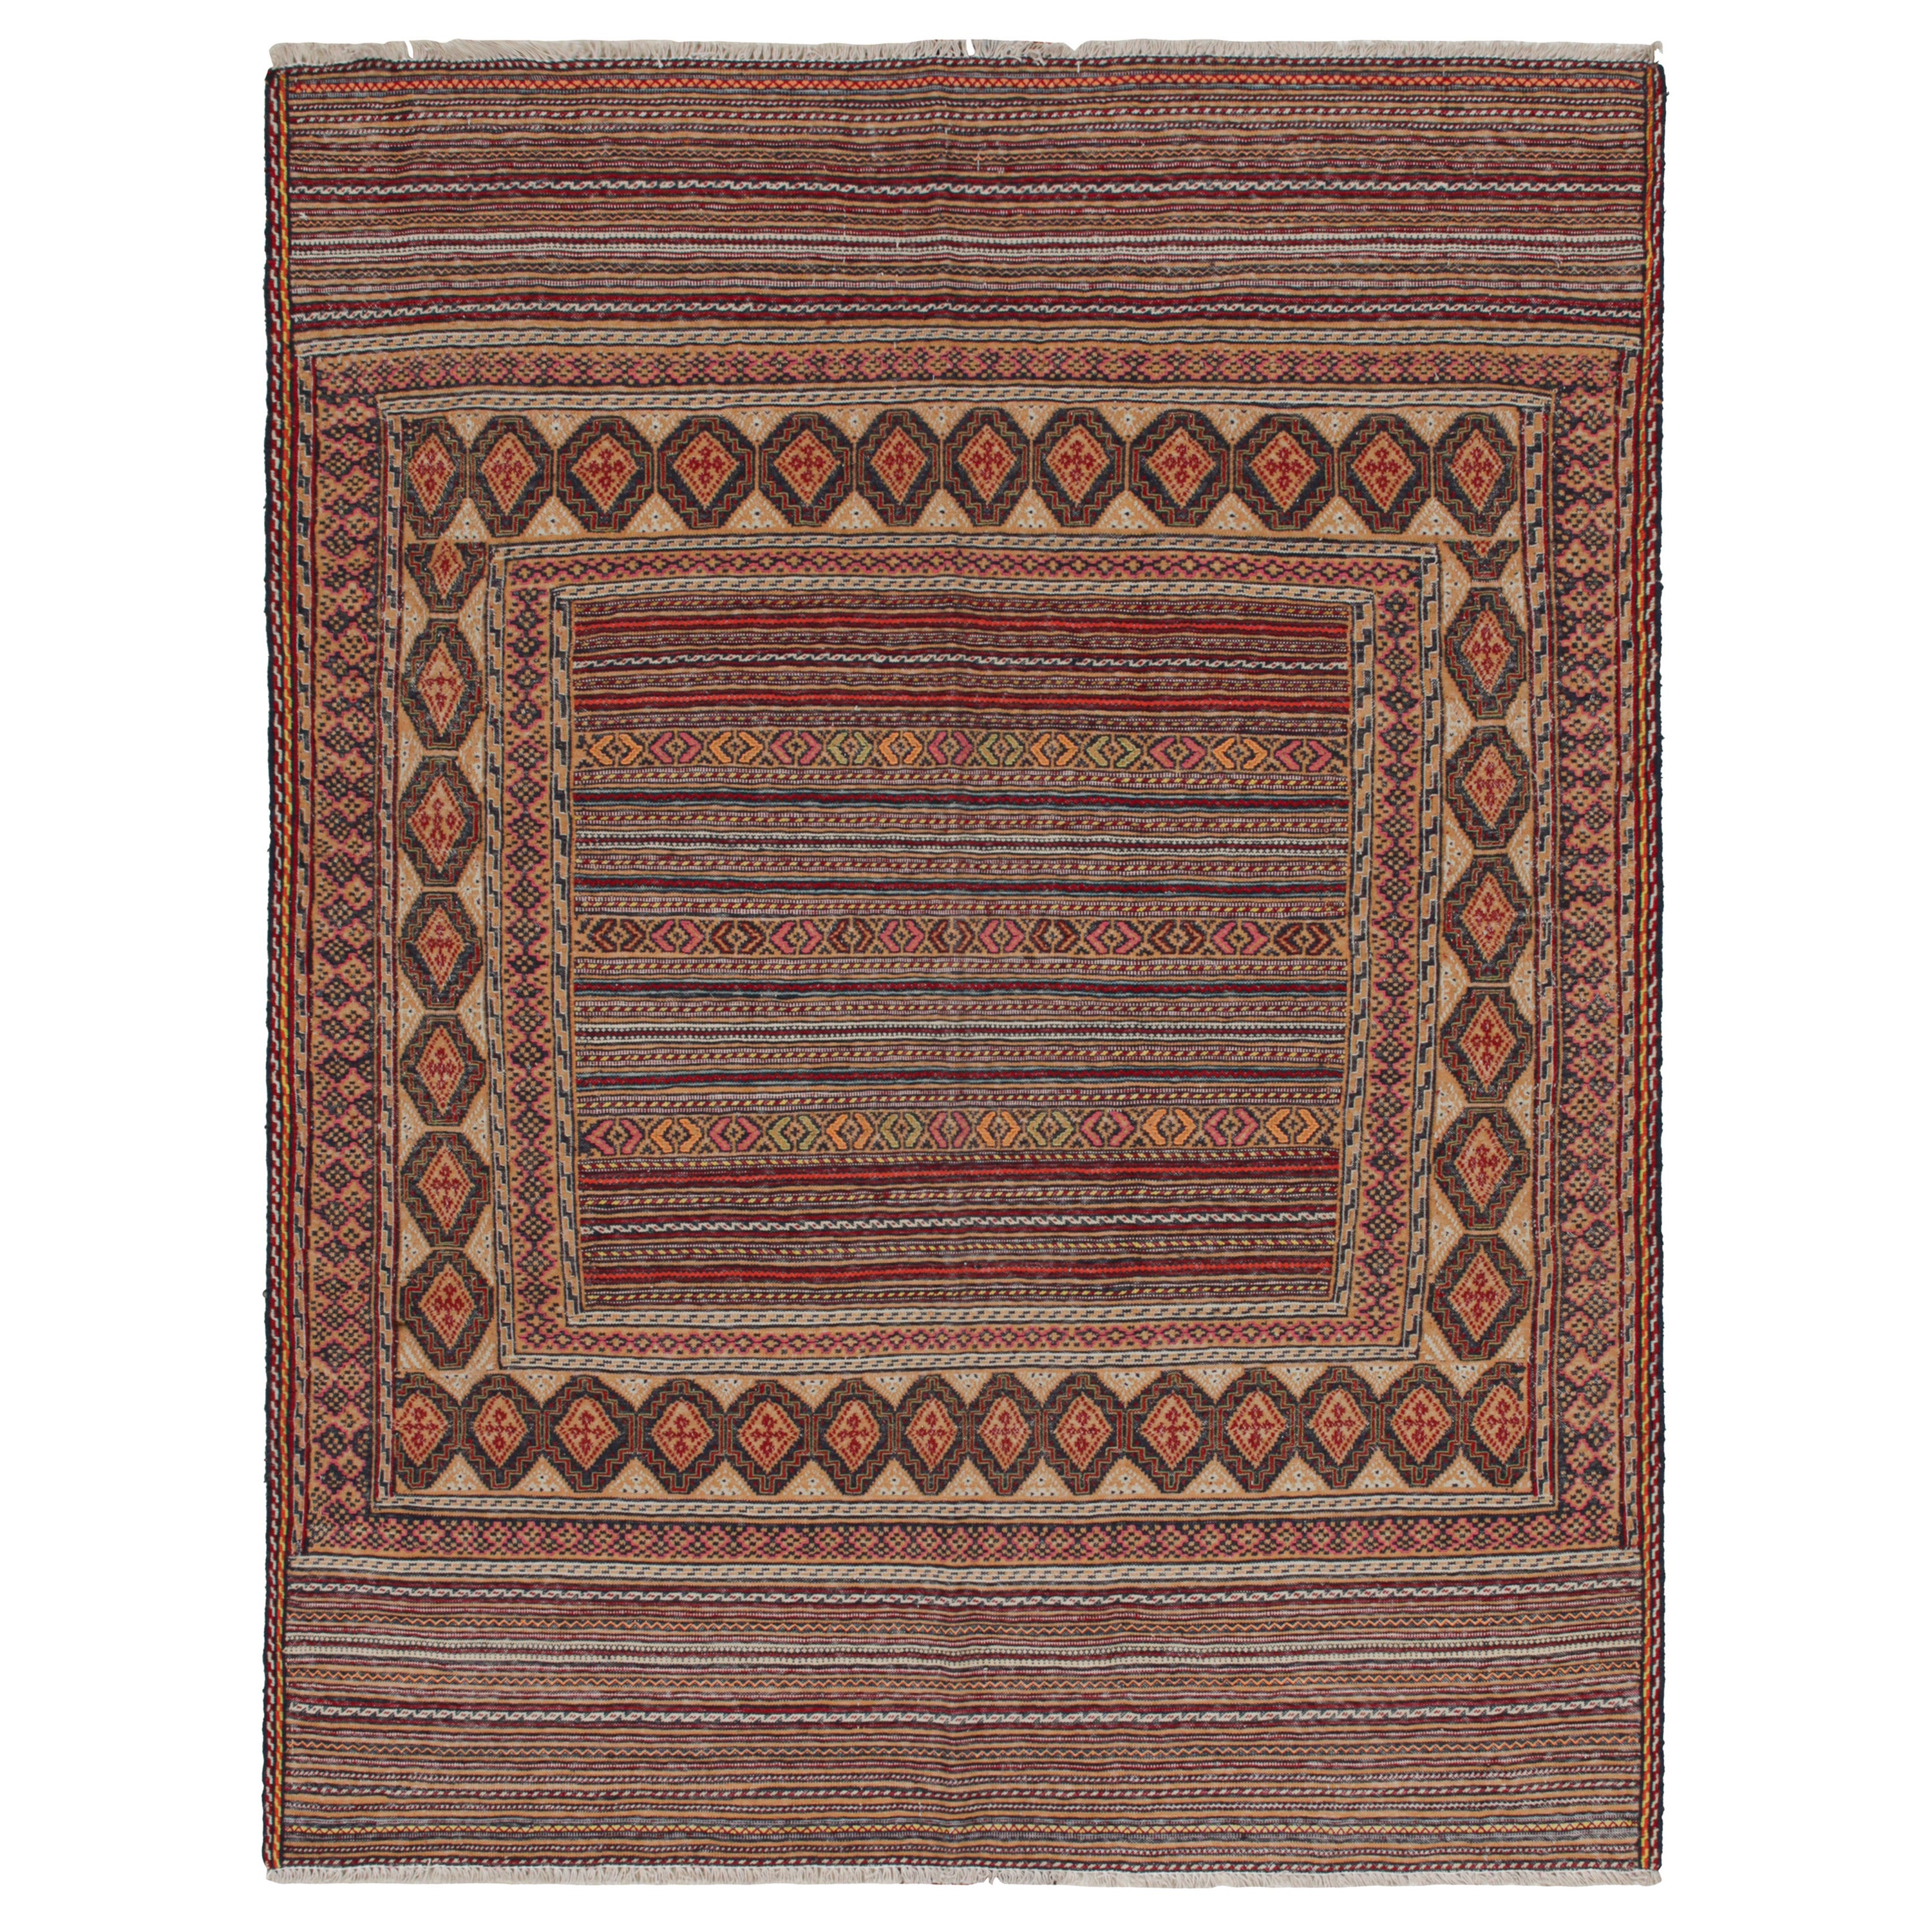 Vintage Baluch Kilim in Beige-Brown with Geometric Patterns, from Rug & Kilim For Sale